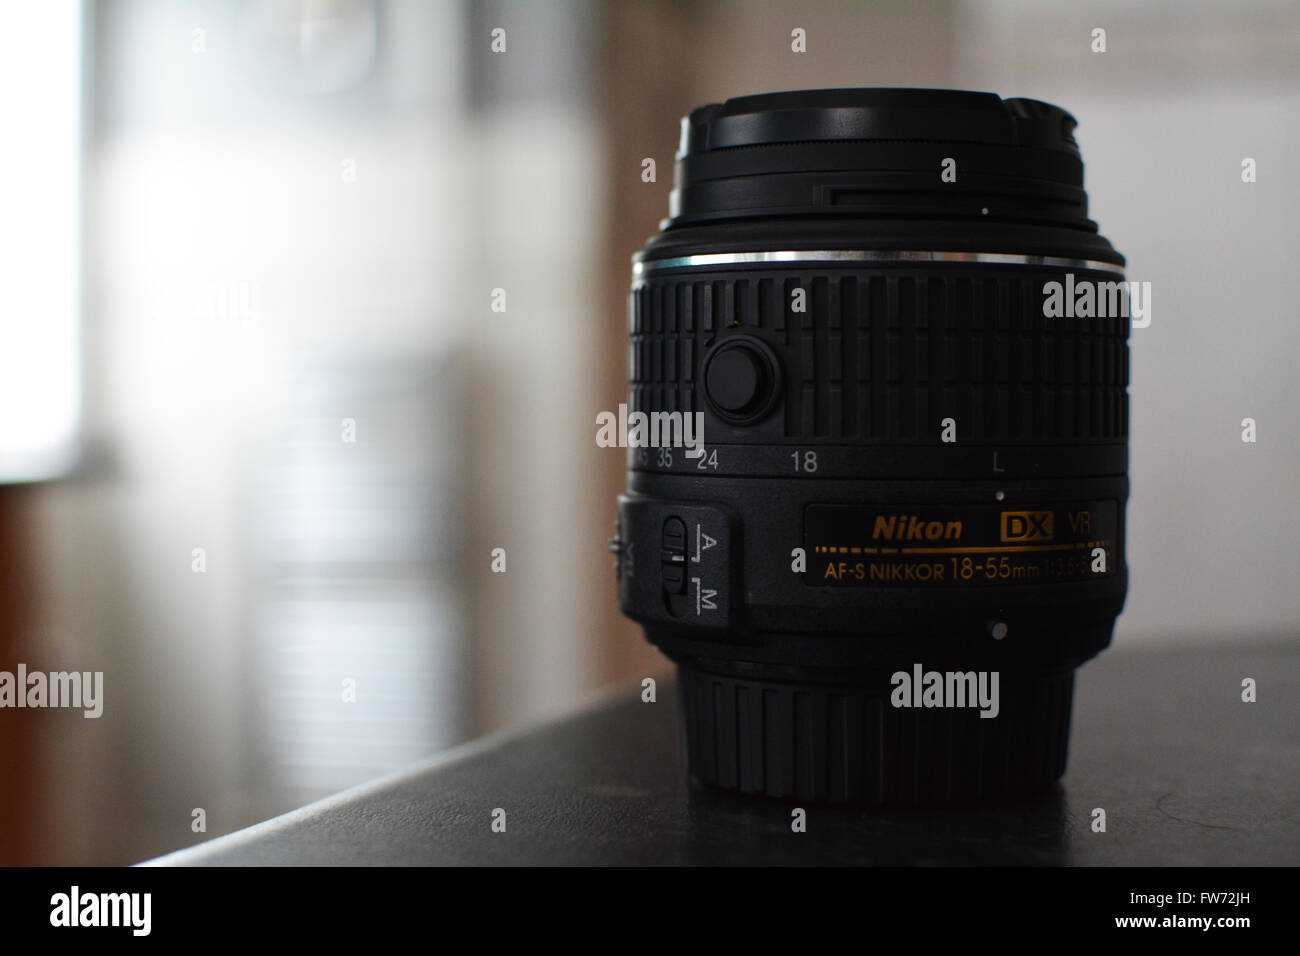 Nikon kit lens not mounted to a camera body. Bokeh background & light pouring through a window. The lens is a 18-55mm VR DX. Stock Photo